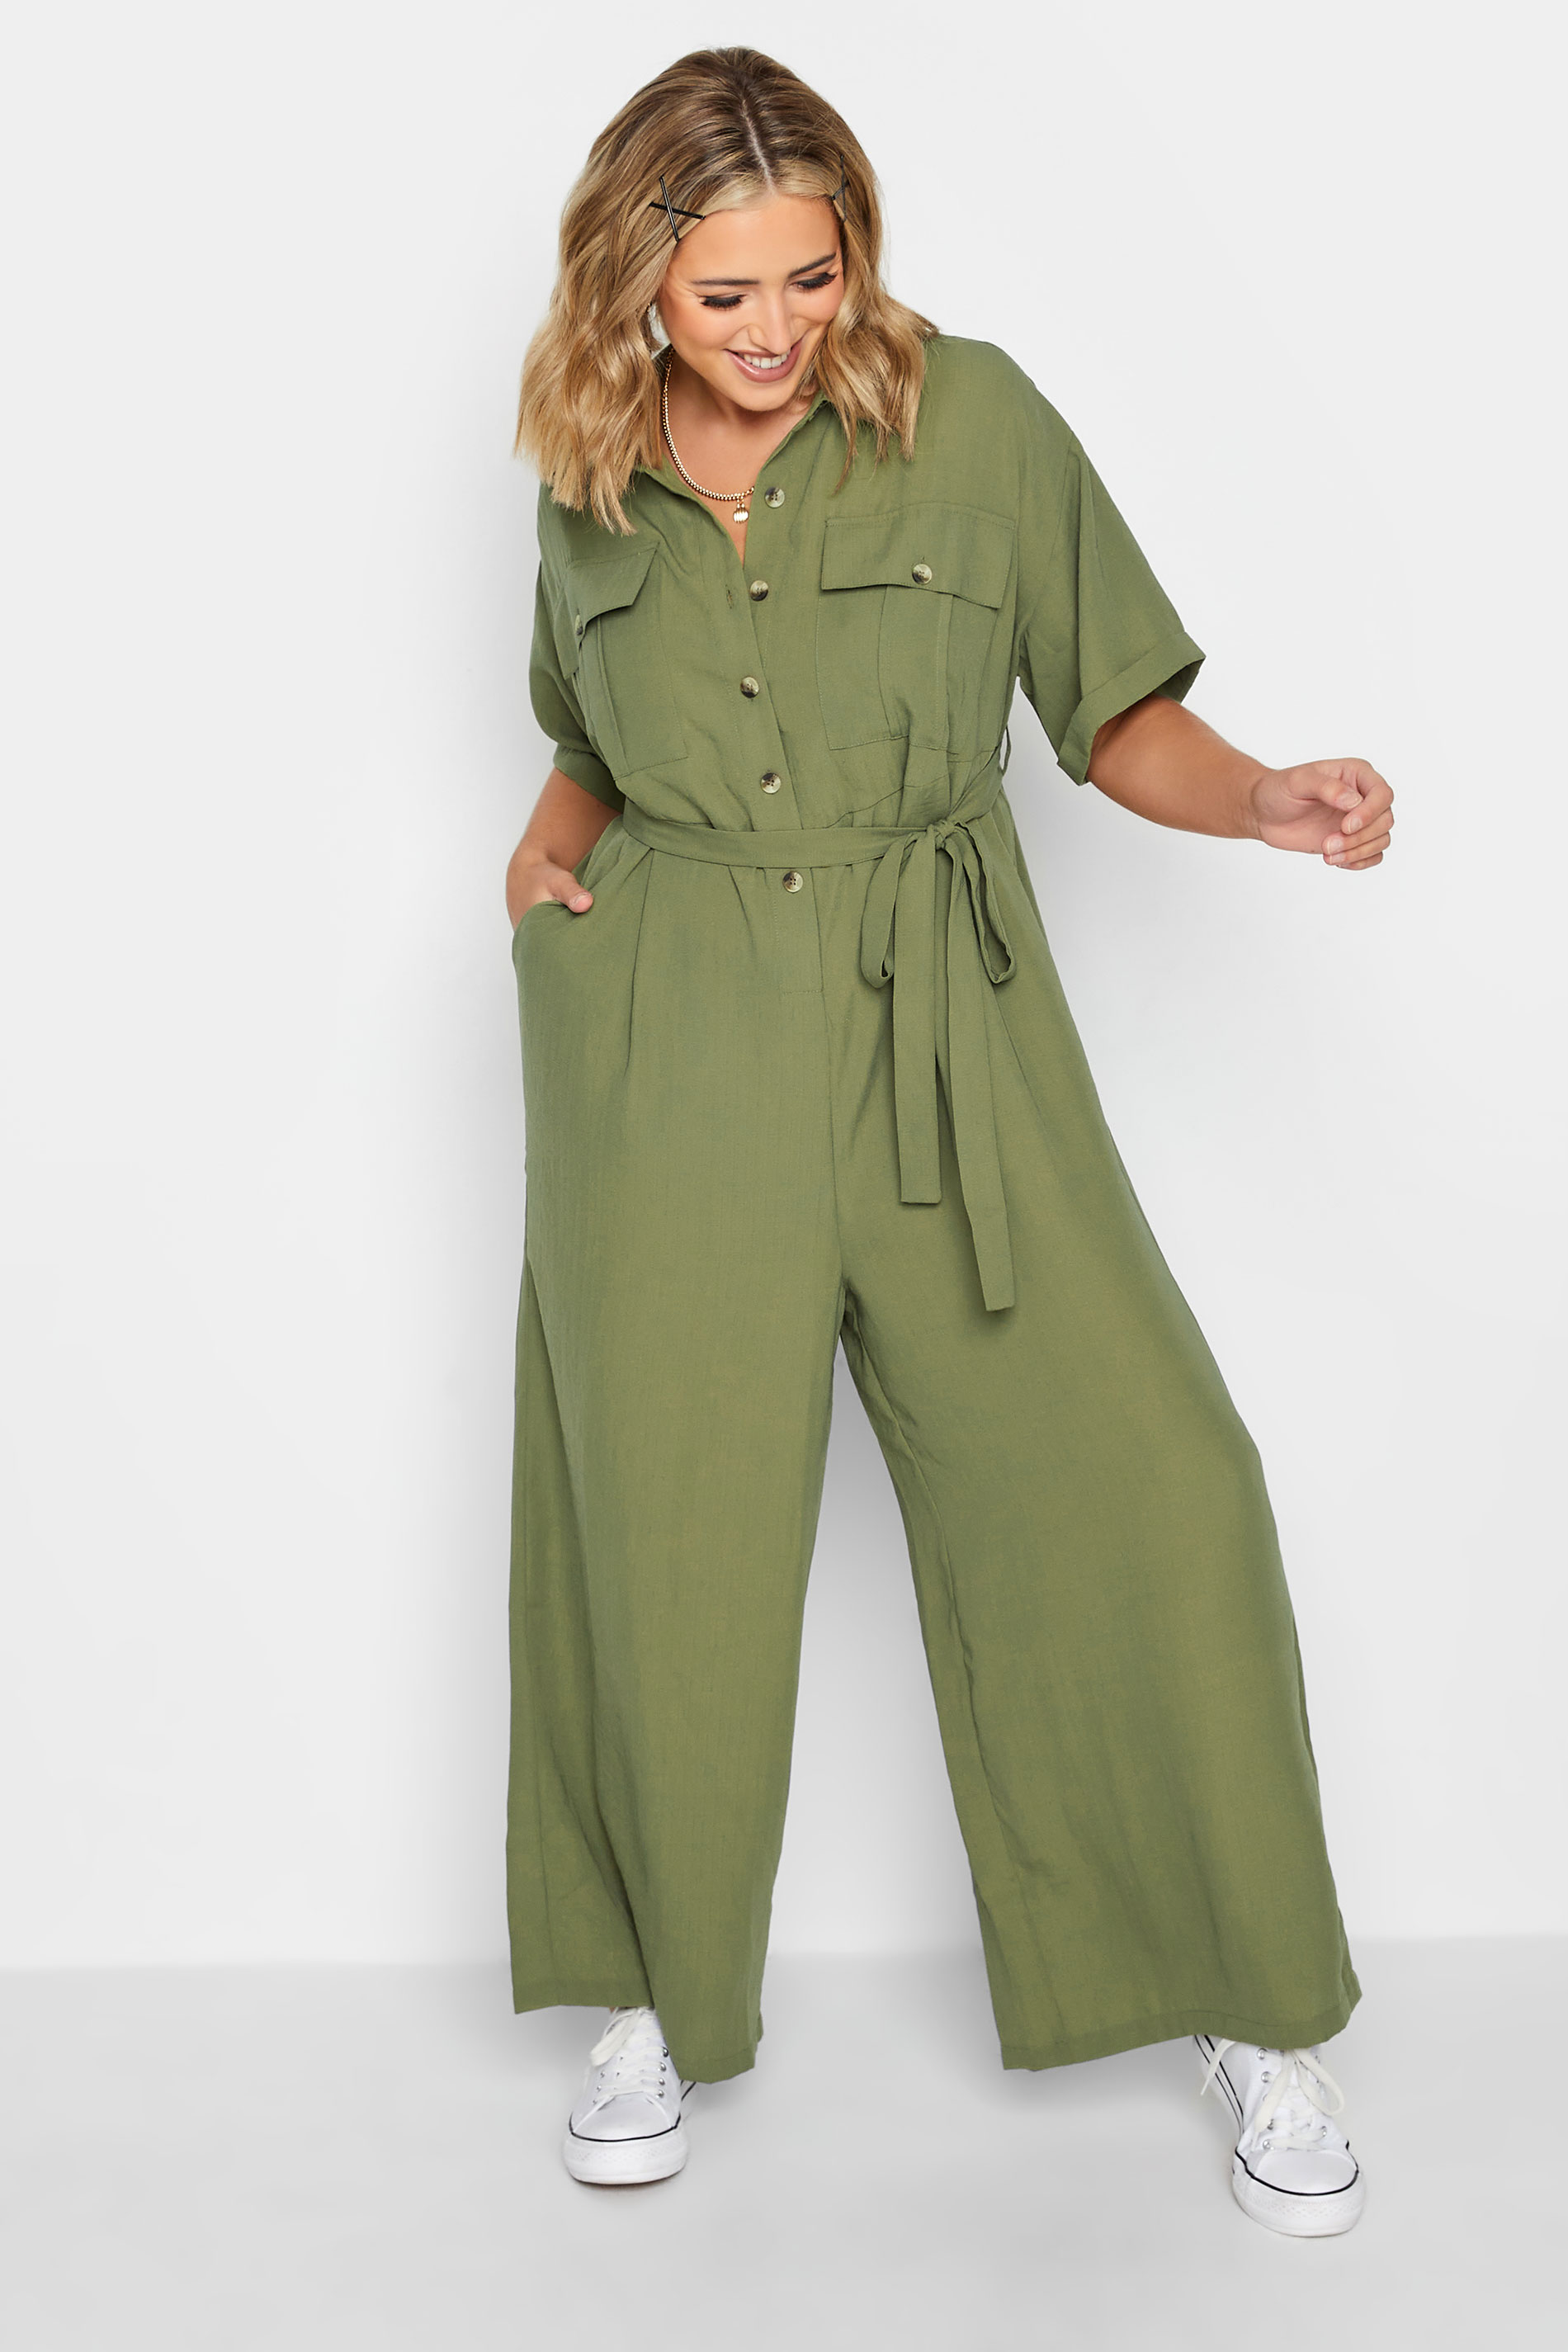 LIMITED COLLECTION Plus Size Khaki Green Jumpsuit | Yours Clothing 1